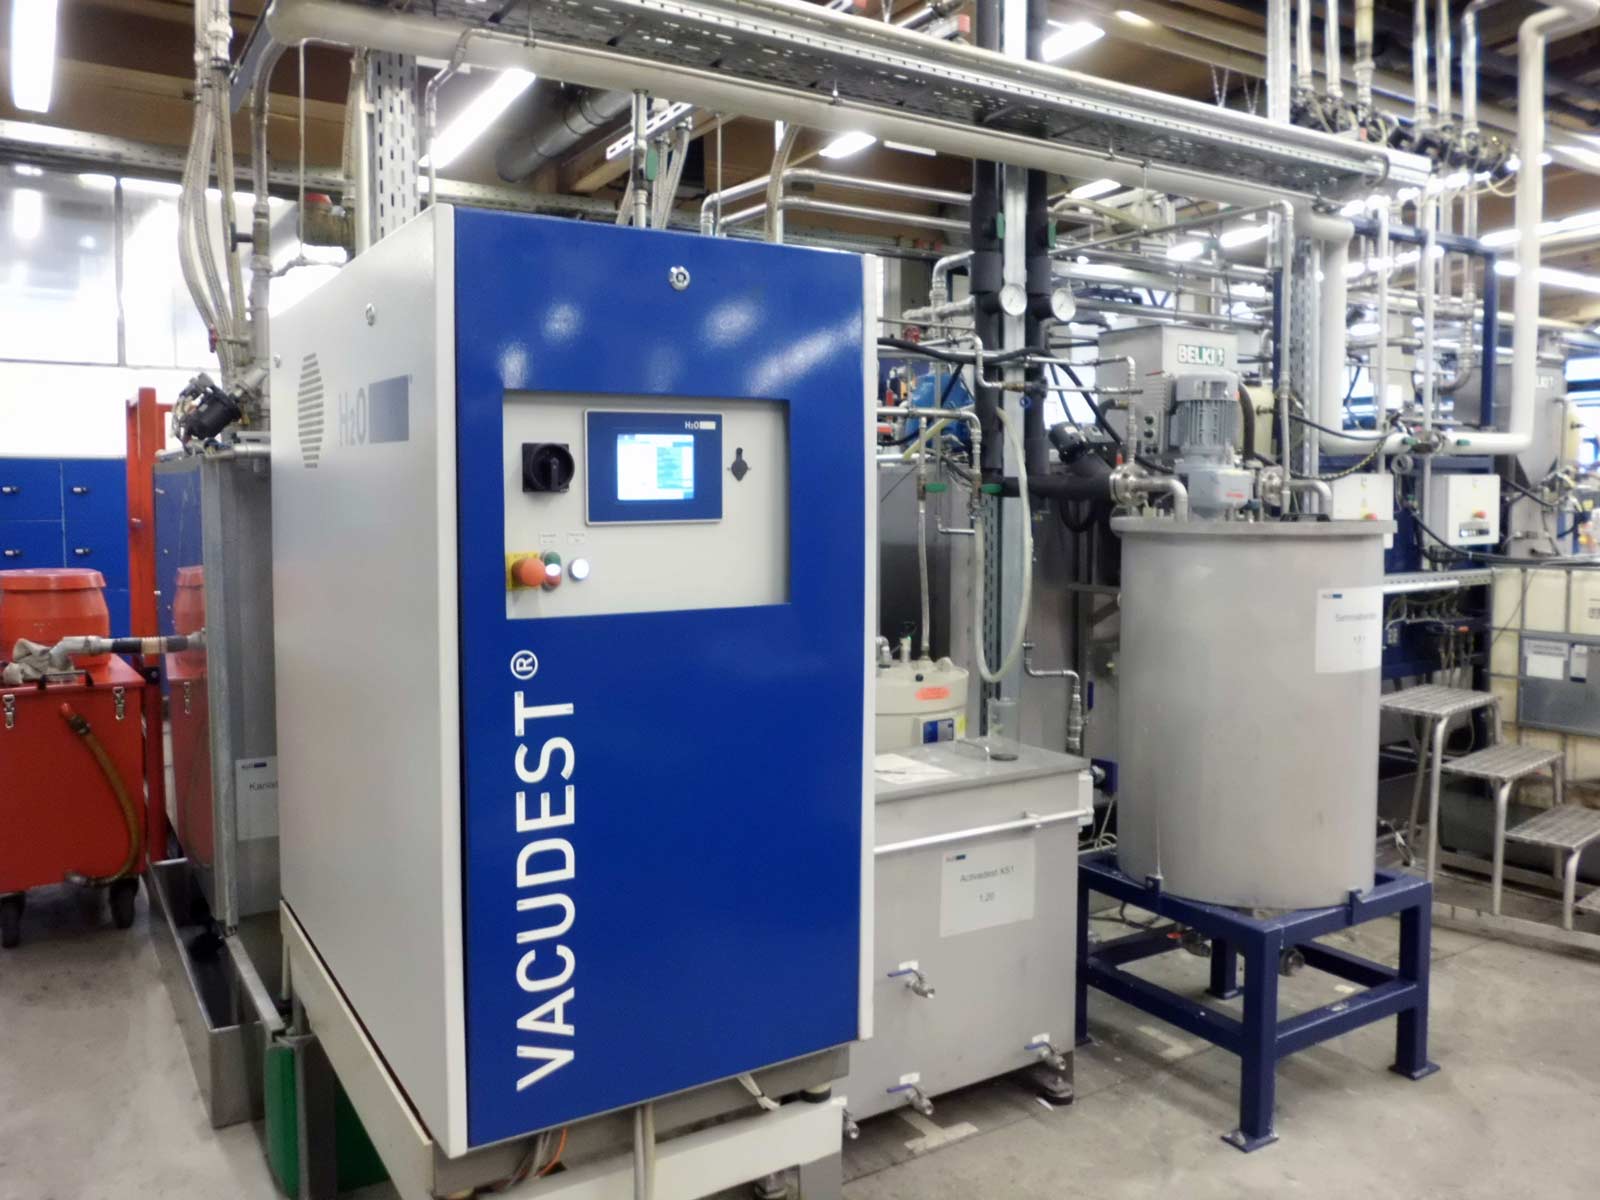 The VACUDEST XS enables IWIS in Landsberg to recycle the wash water for their parts cleaning.